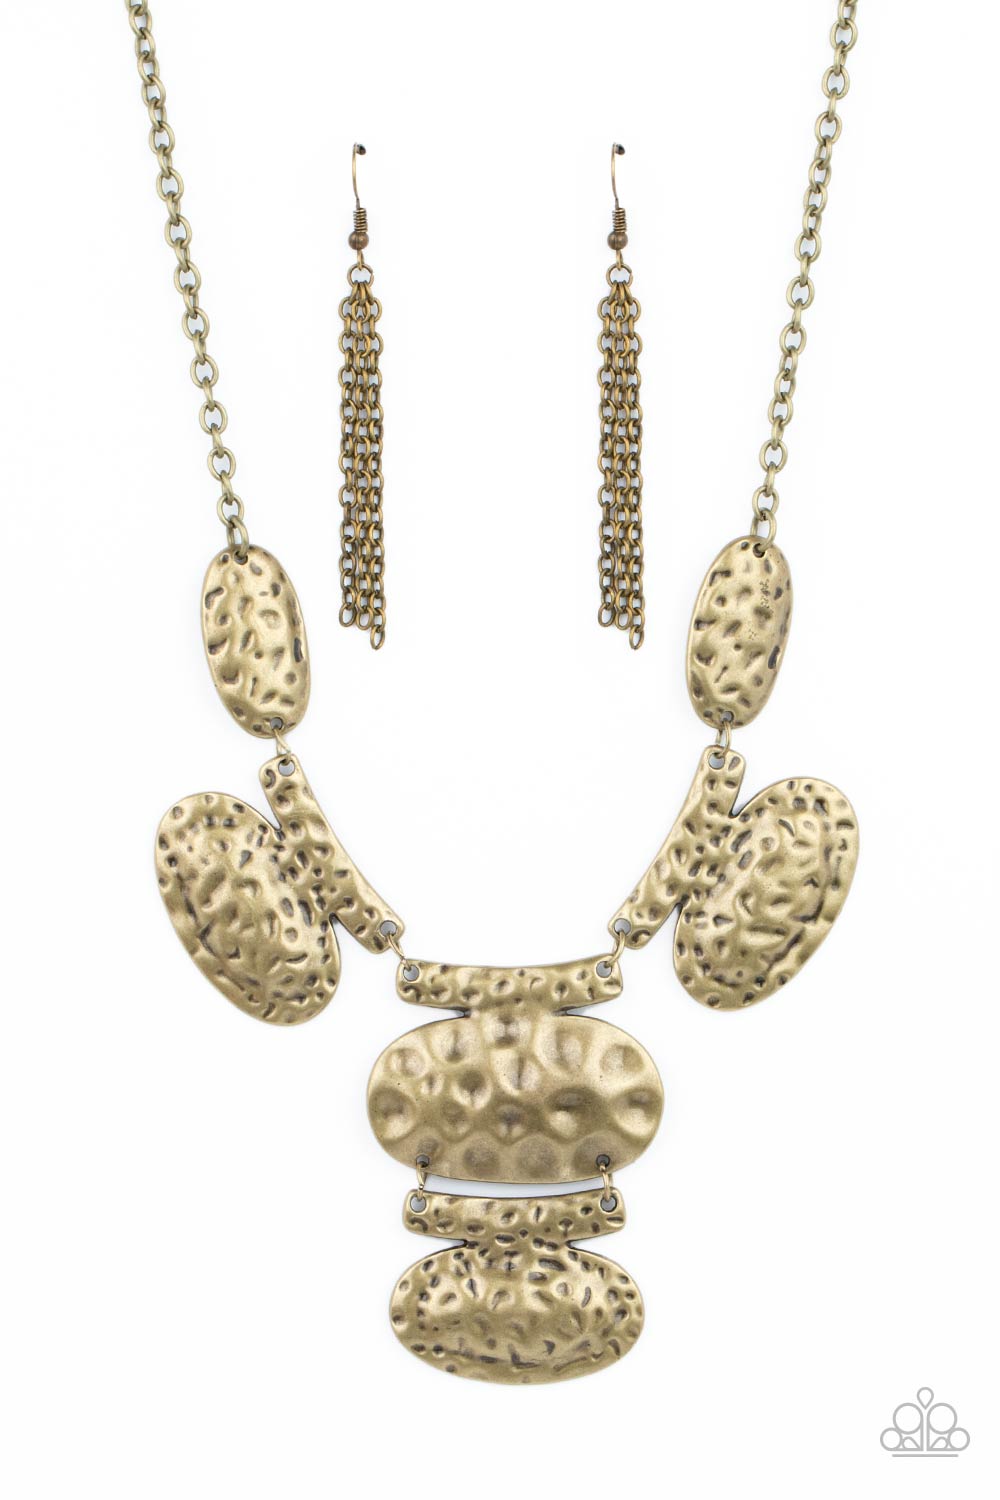 Gallery Relic - Brass Necklace - Paparazzi Accessories - Paparazzi Accessories 